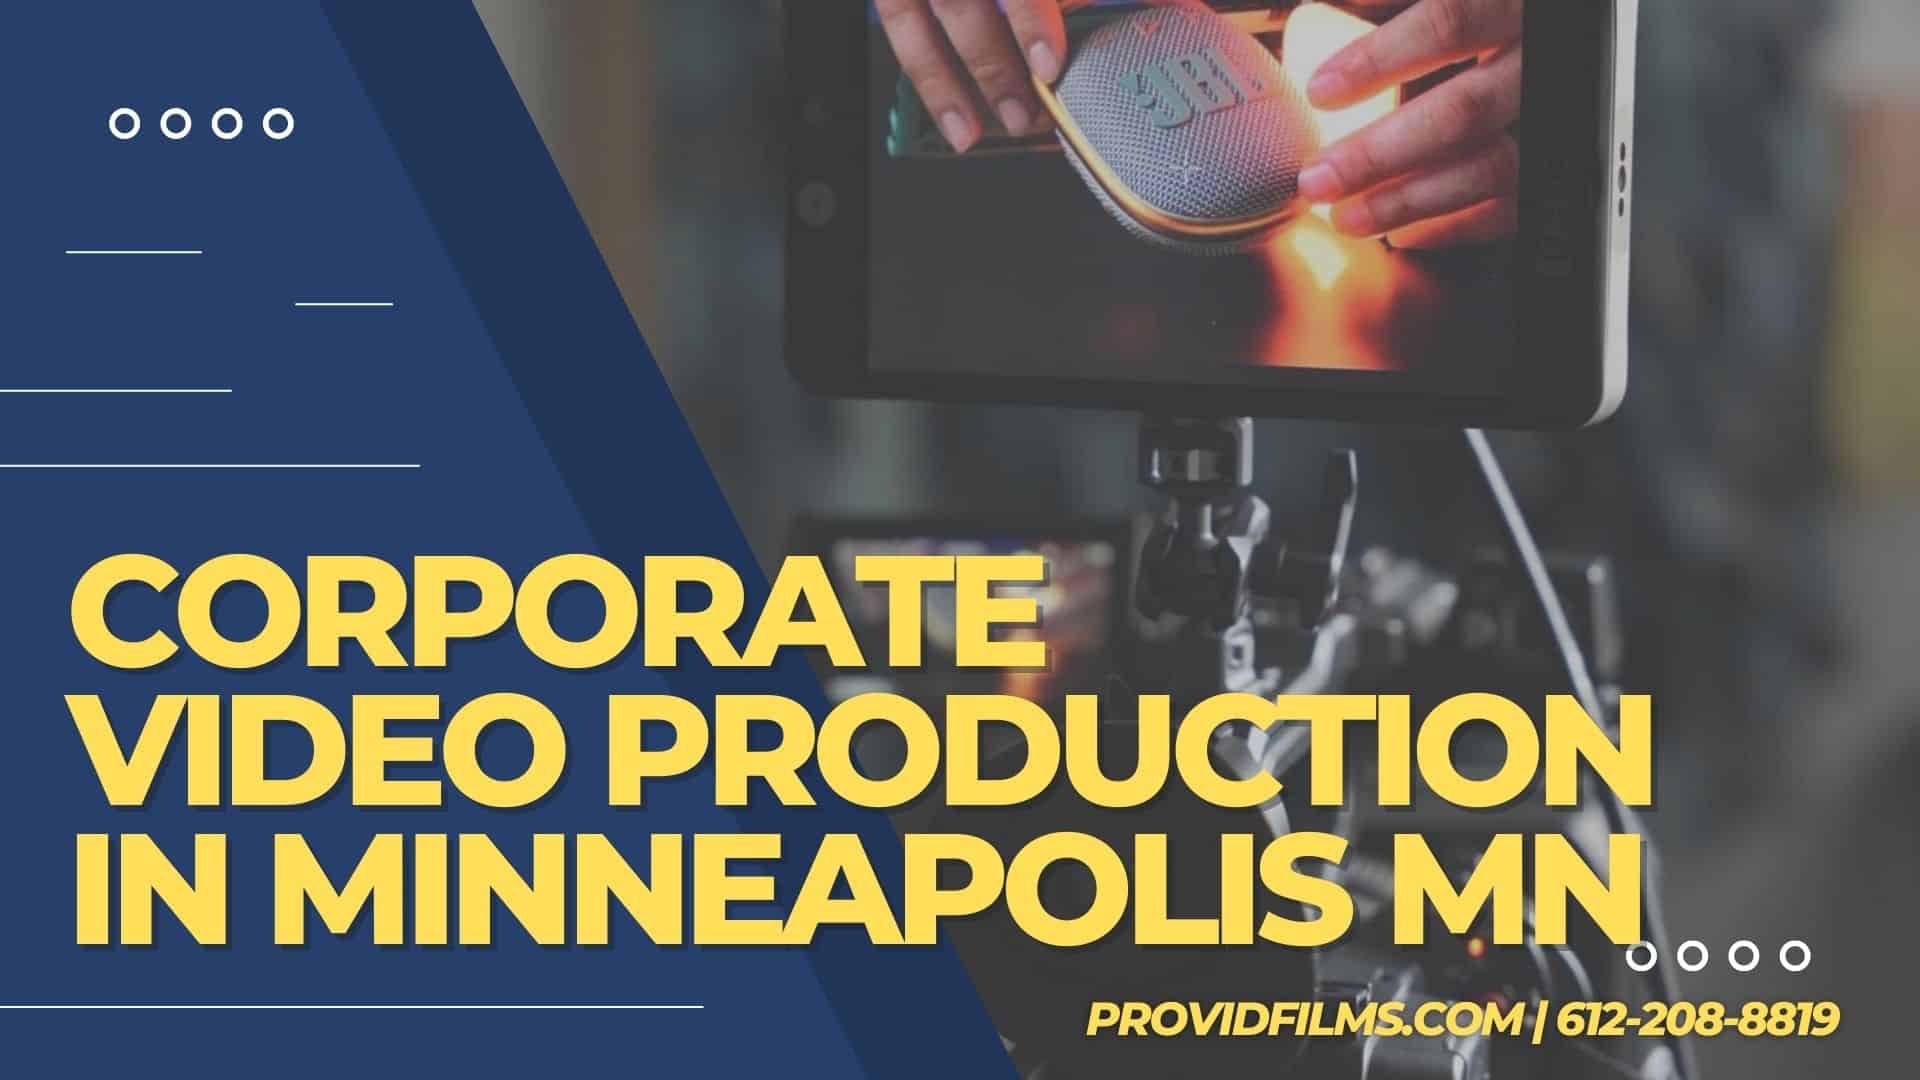 corporate video production company in Minneapolis MN - Provid Films